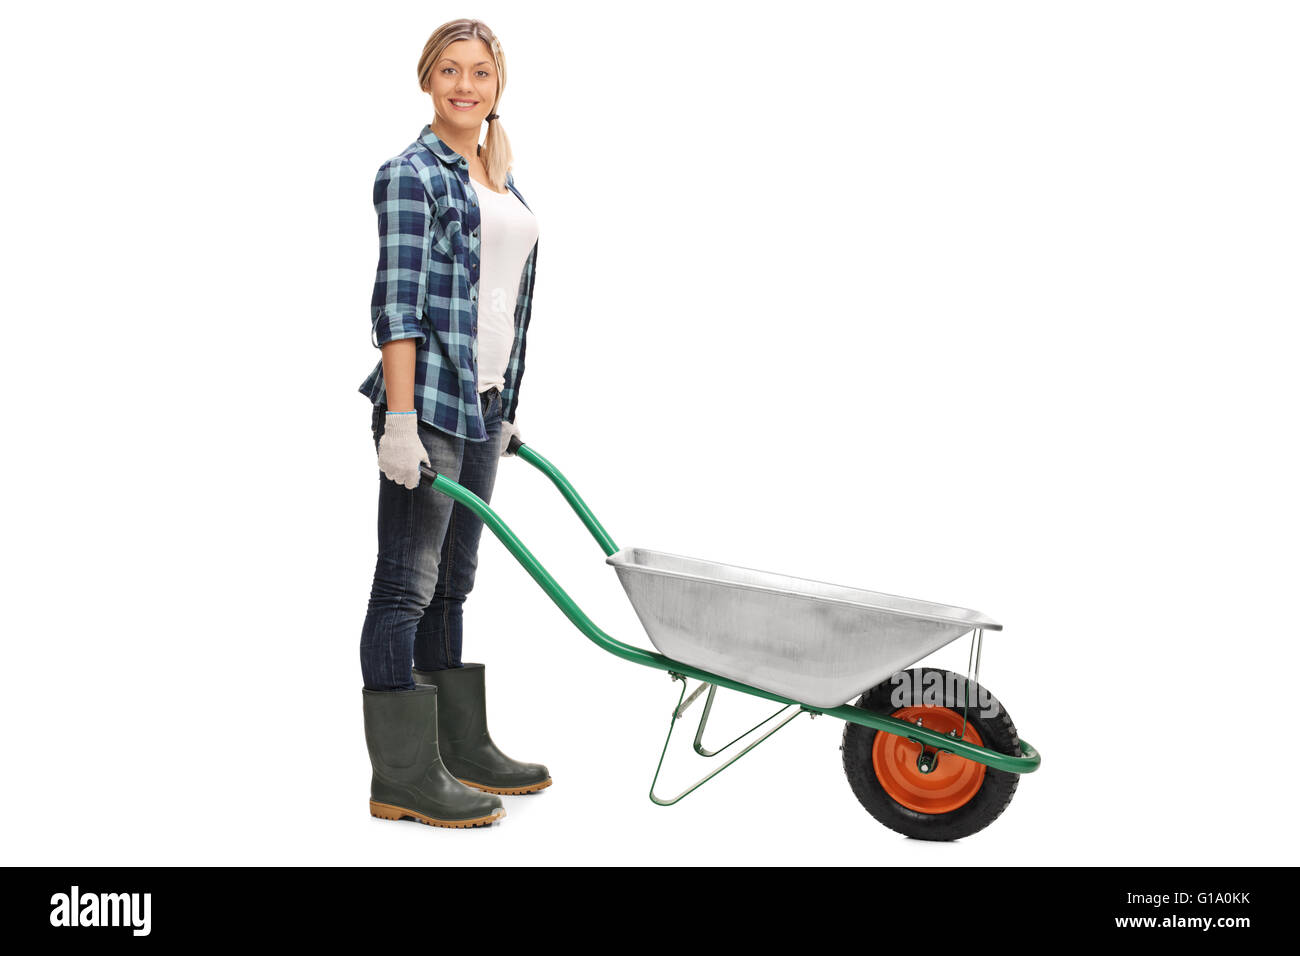 Cheerful woman posing with an empty wheelbarrow isolated on white background Stock Photo